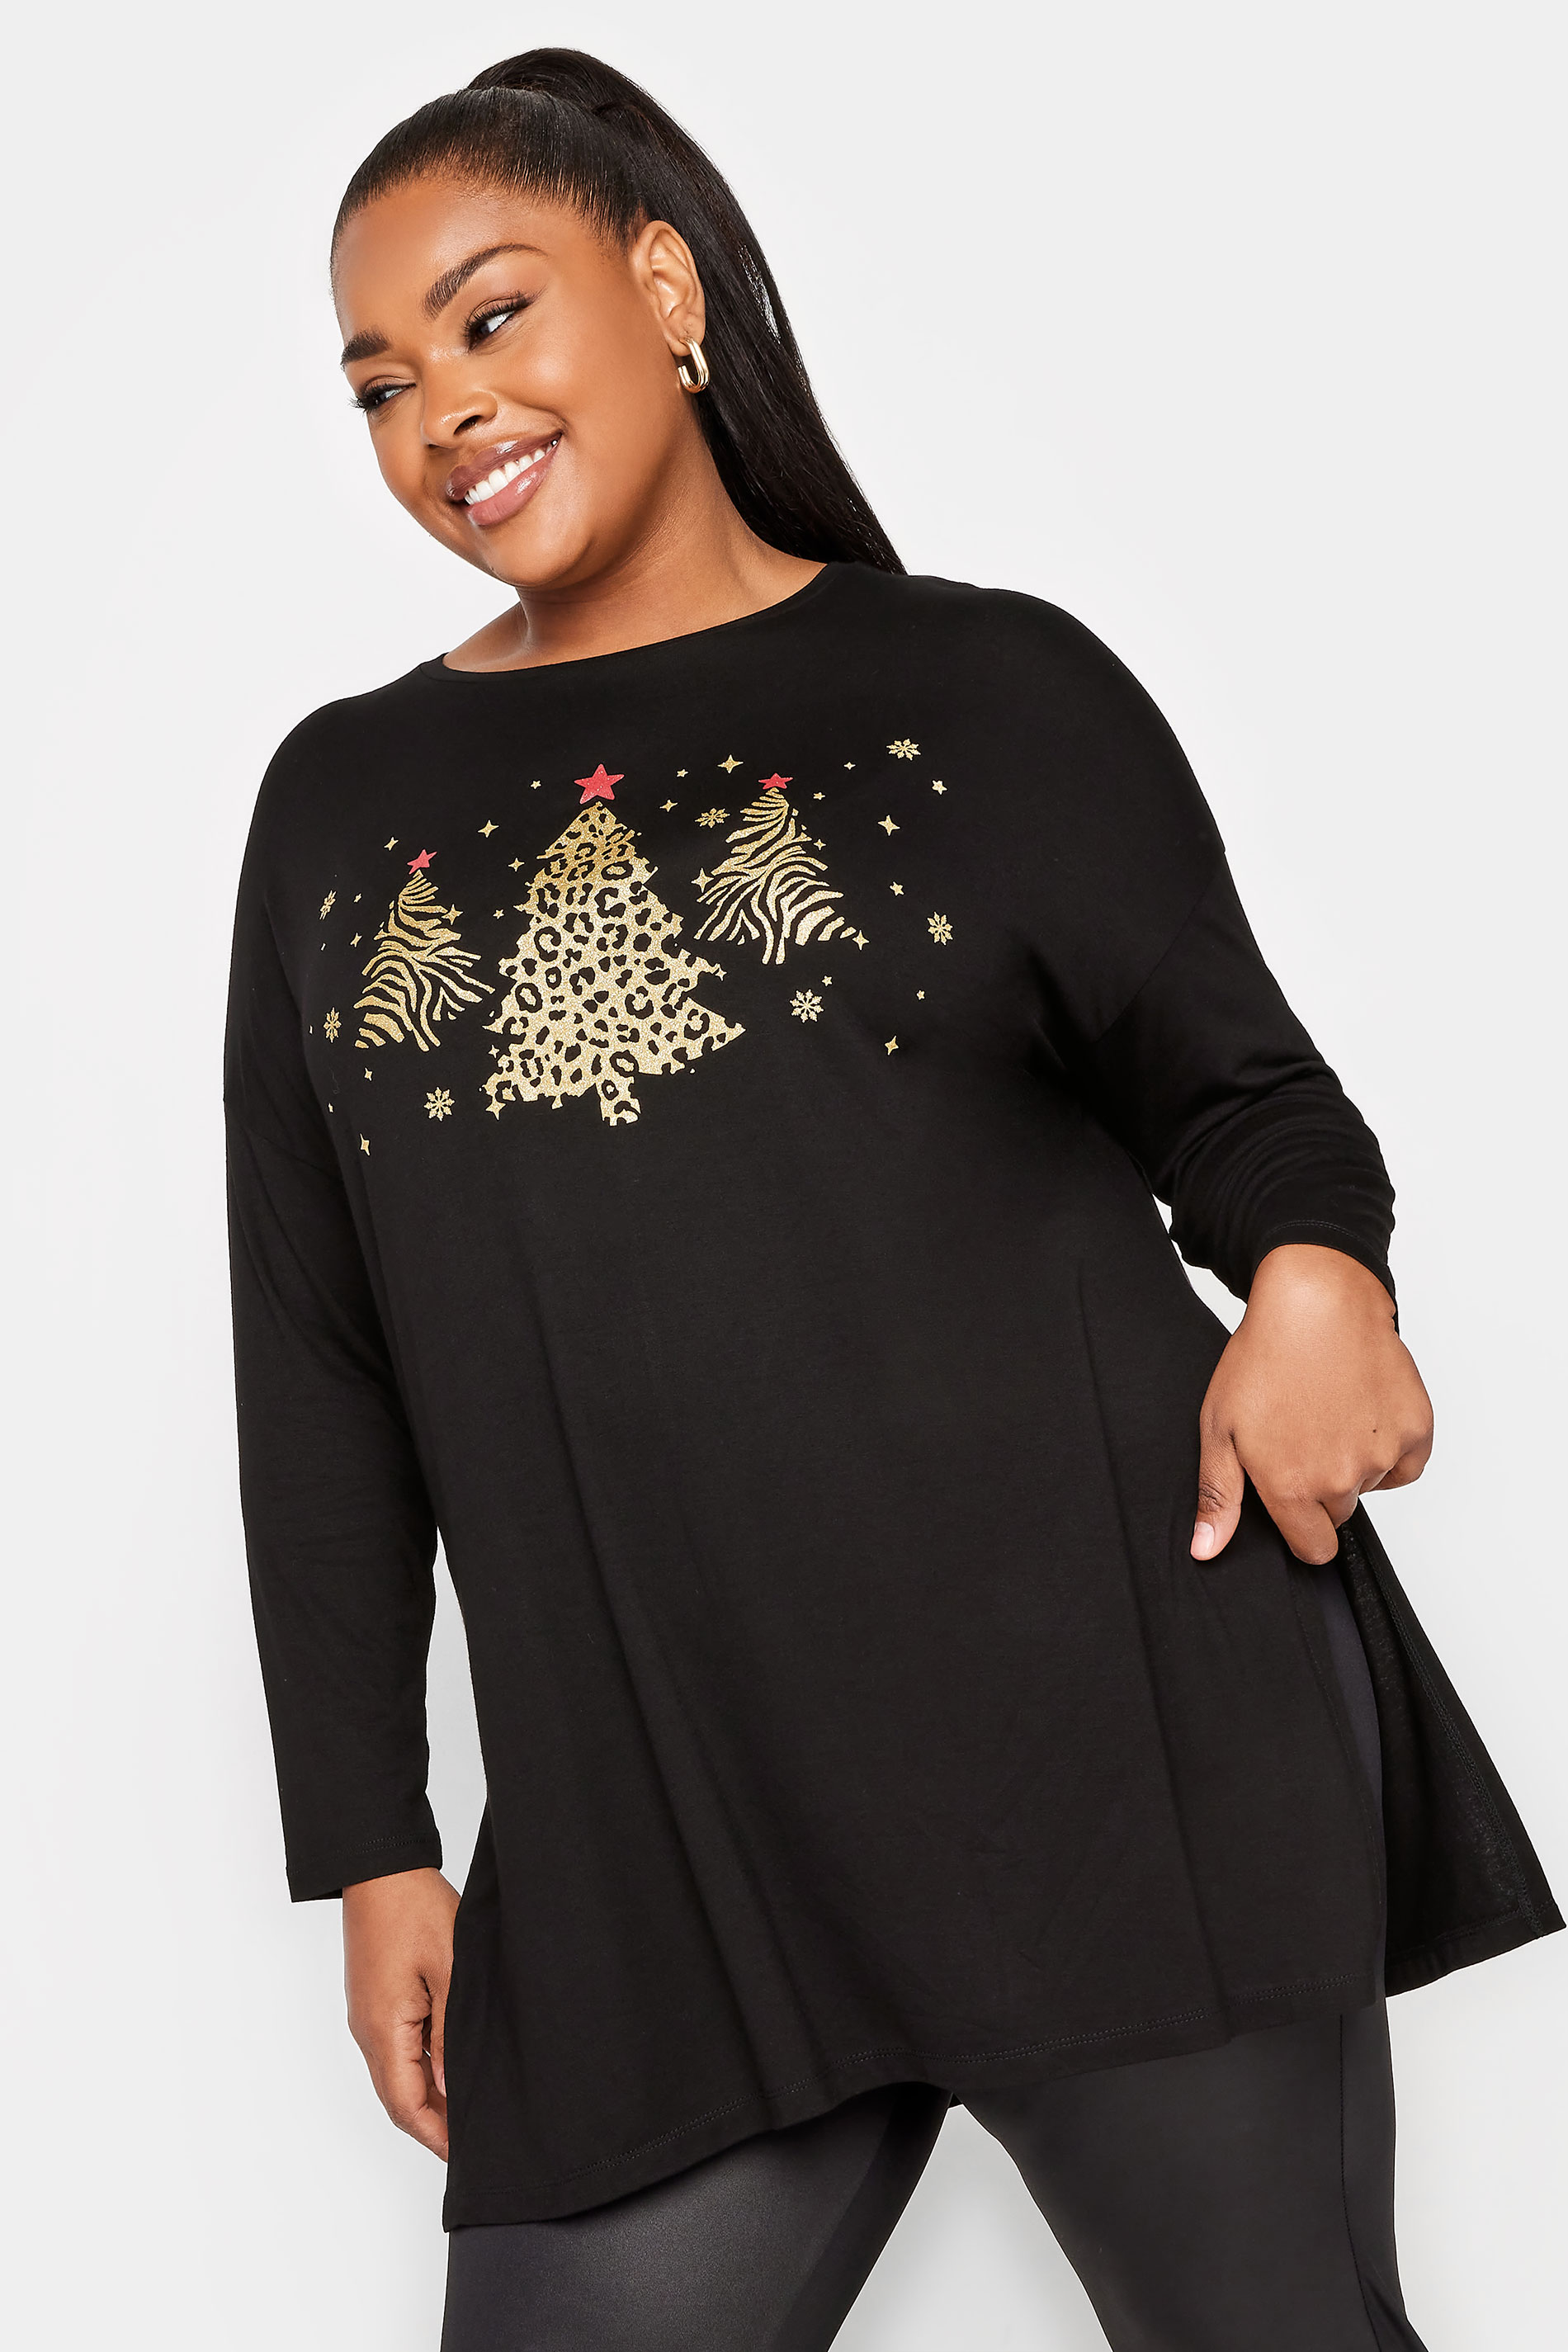 YOURS Plus Size Black Animal Print Christmas Tree Novelty T-Shirt | Yours Clothing 1